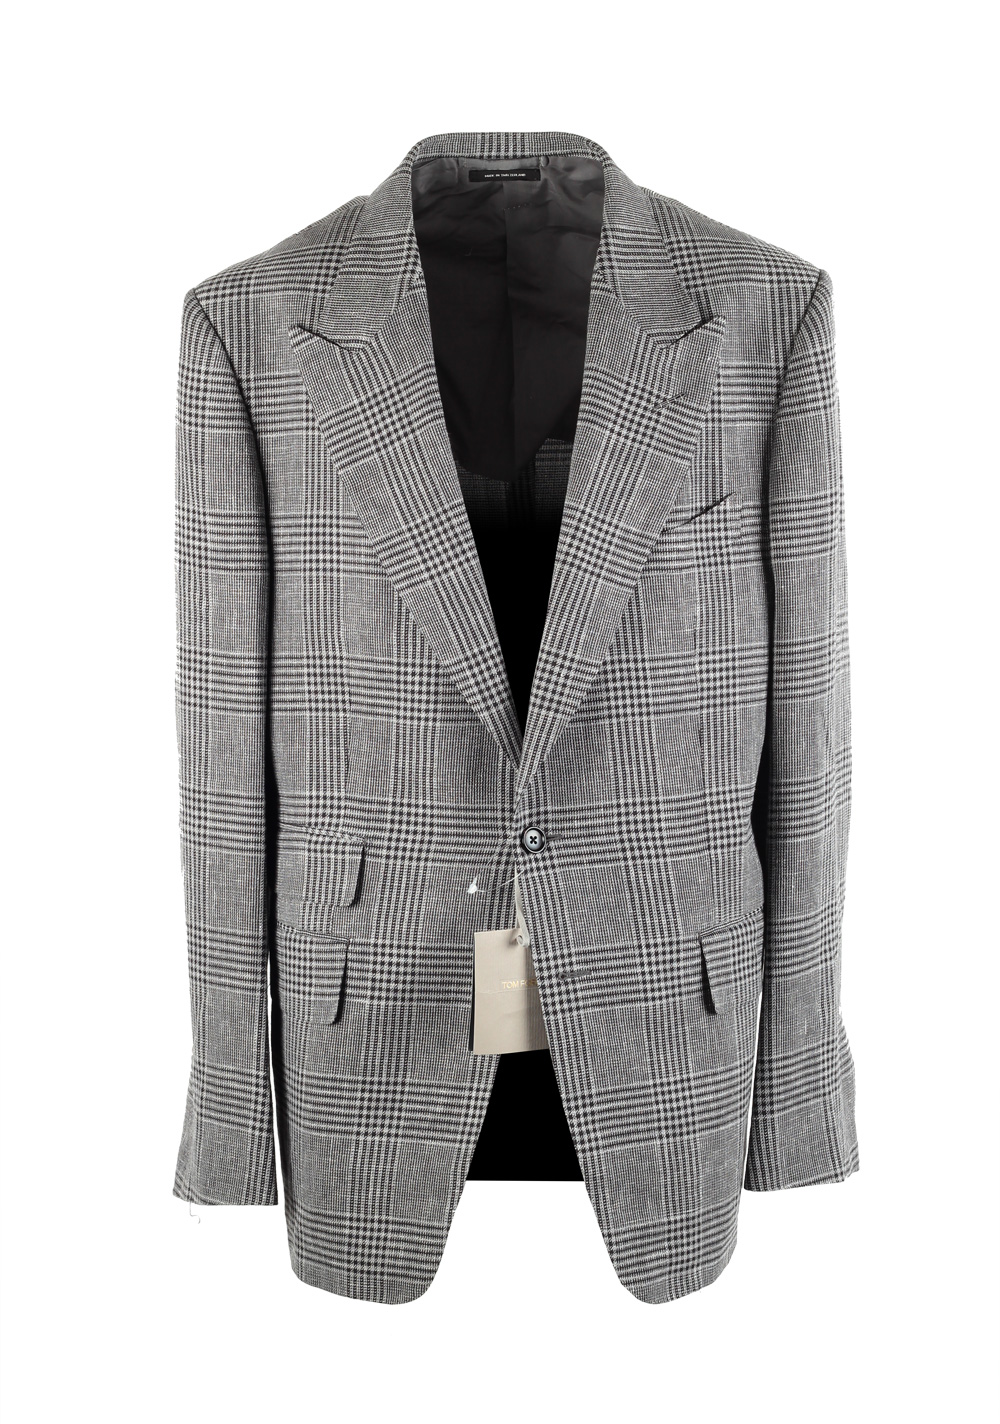 TOM FORD Shelton Checked Gray Suit Size 54 / 44R U.S. | Costume Limité